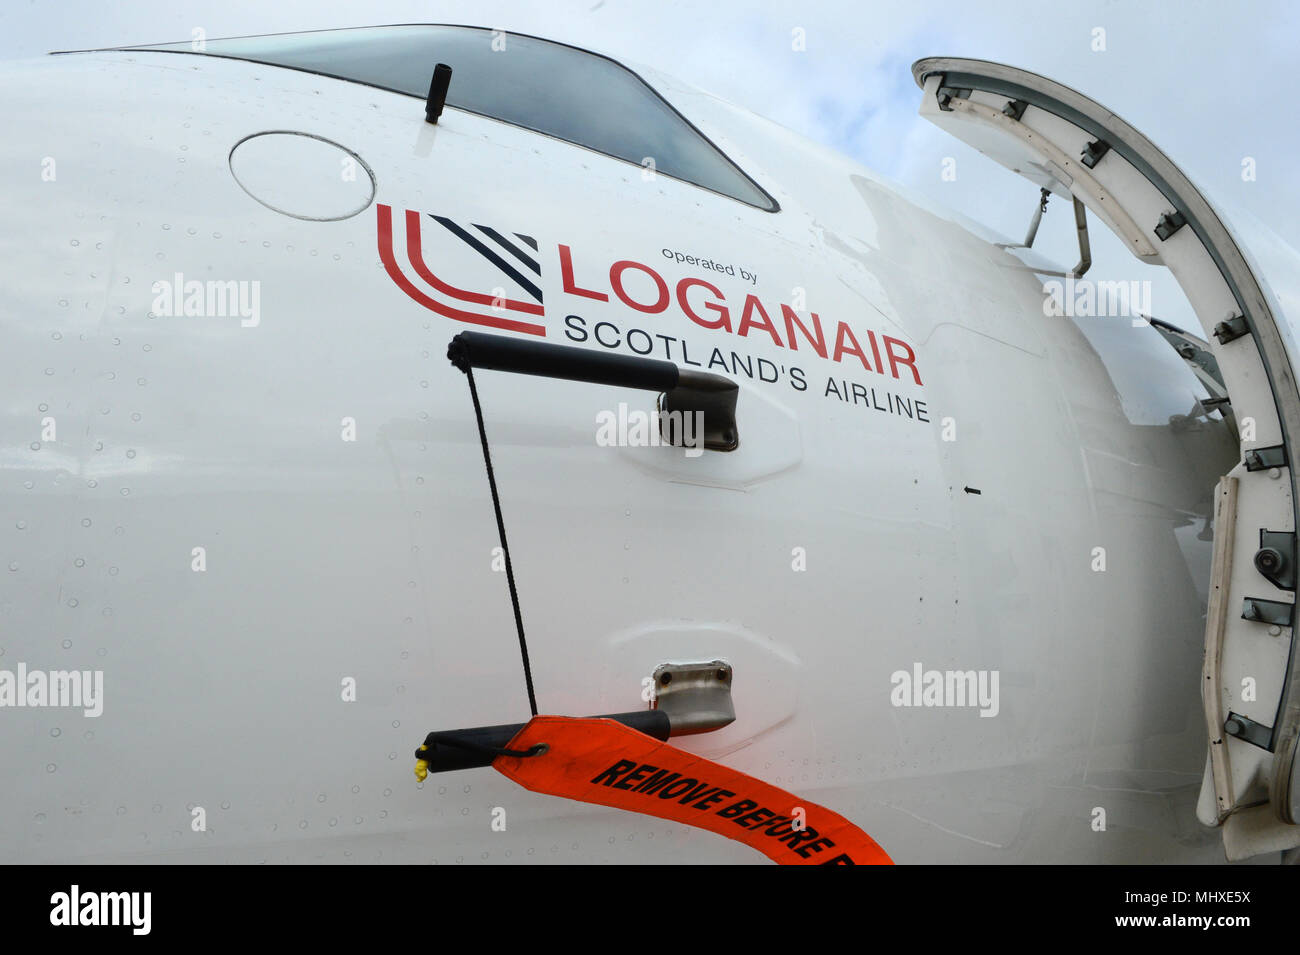 Loganair logo on the fuselage of a plane Stock Photo